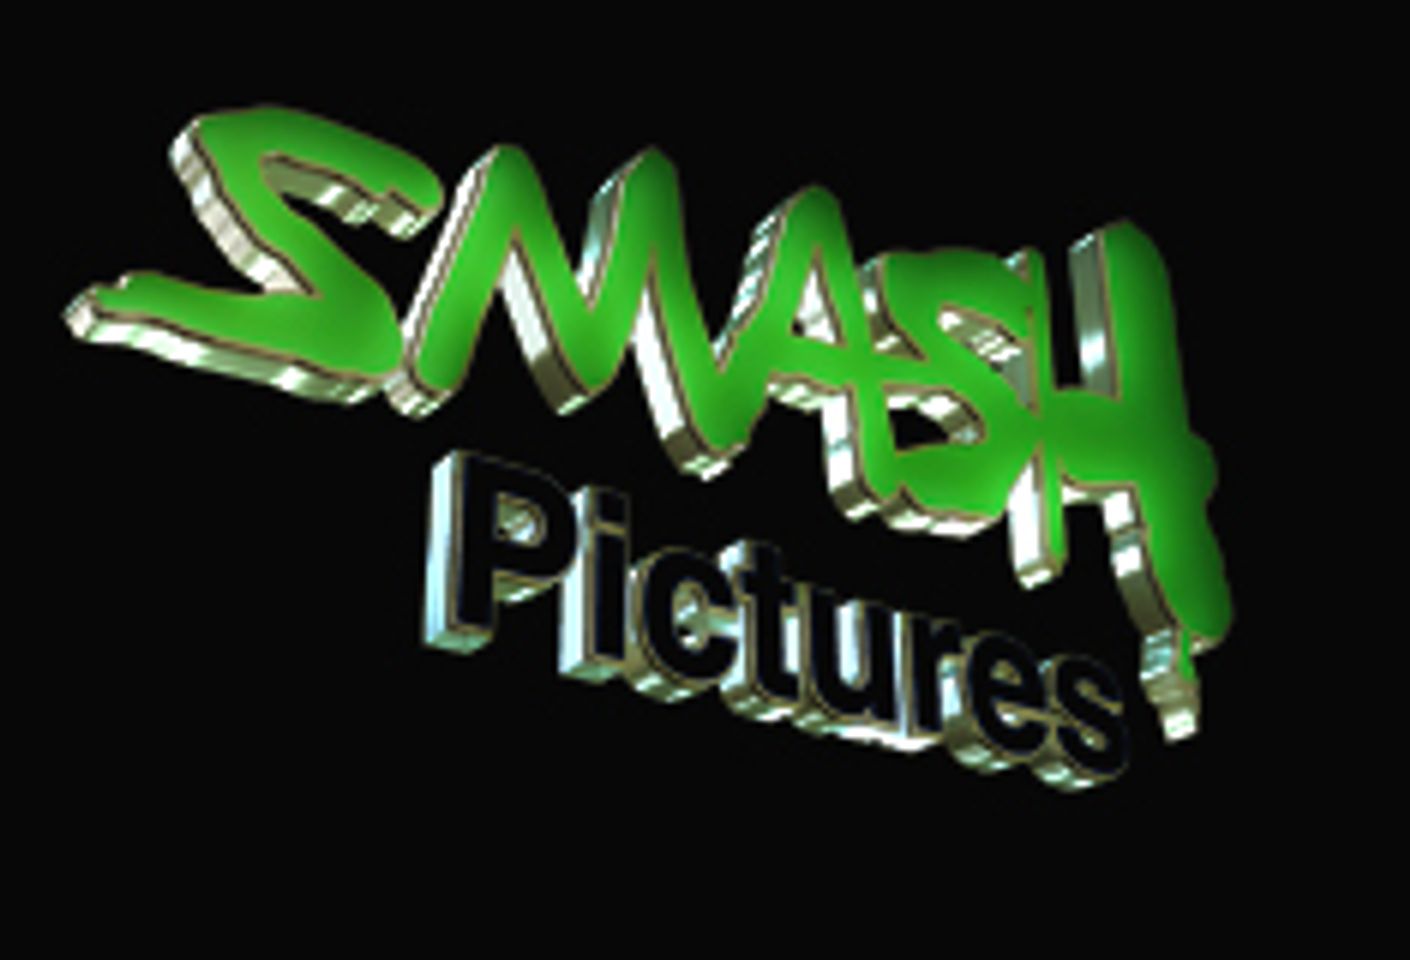 AEBN Streaming New Smash Pictures Movie in Advance of Street Date